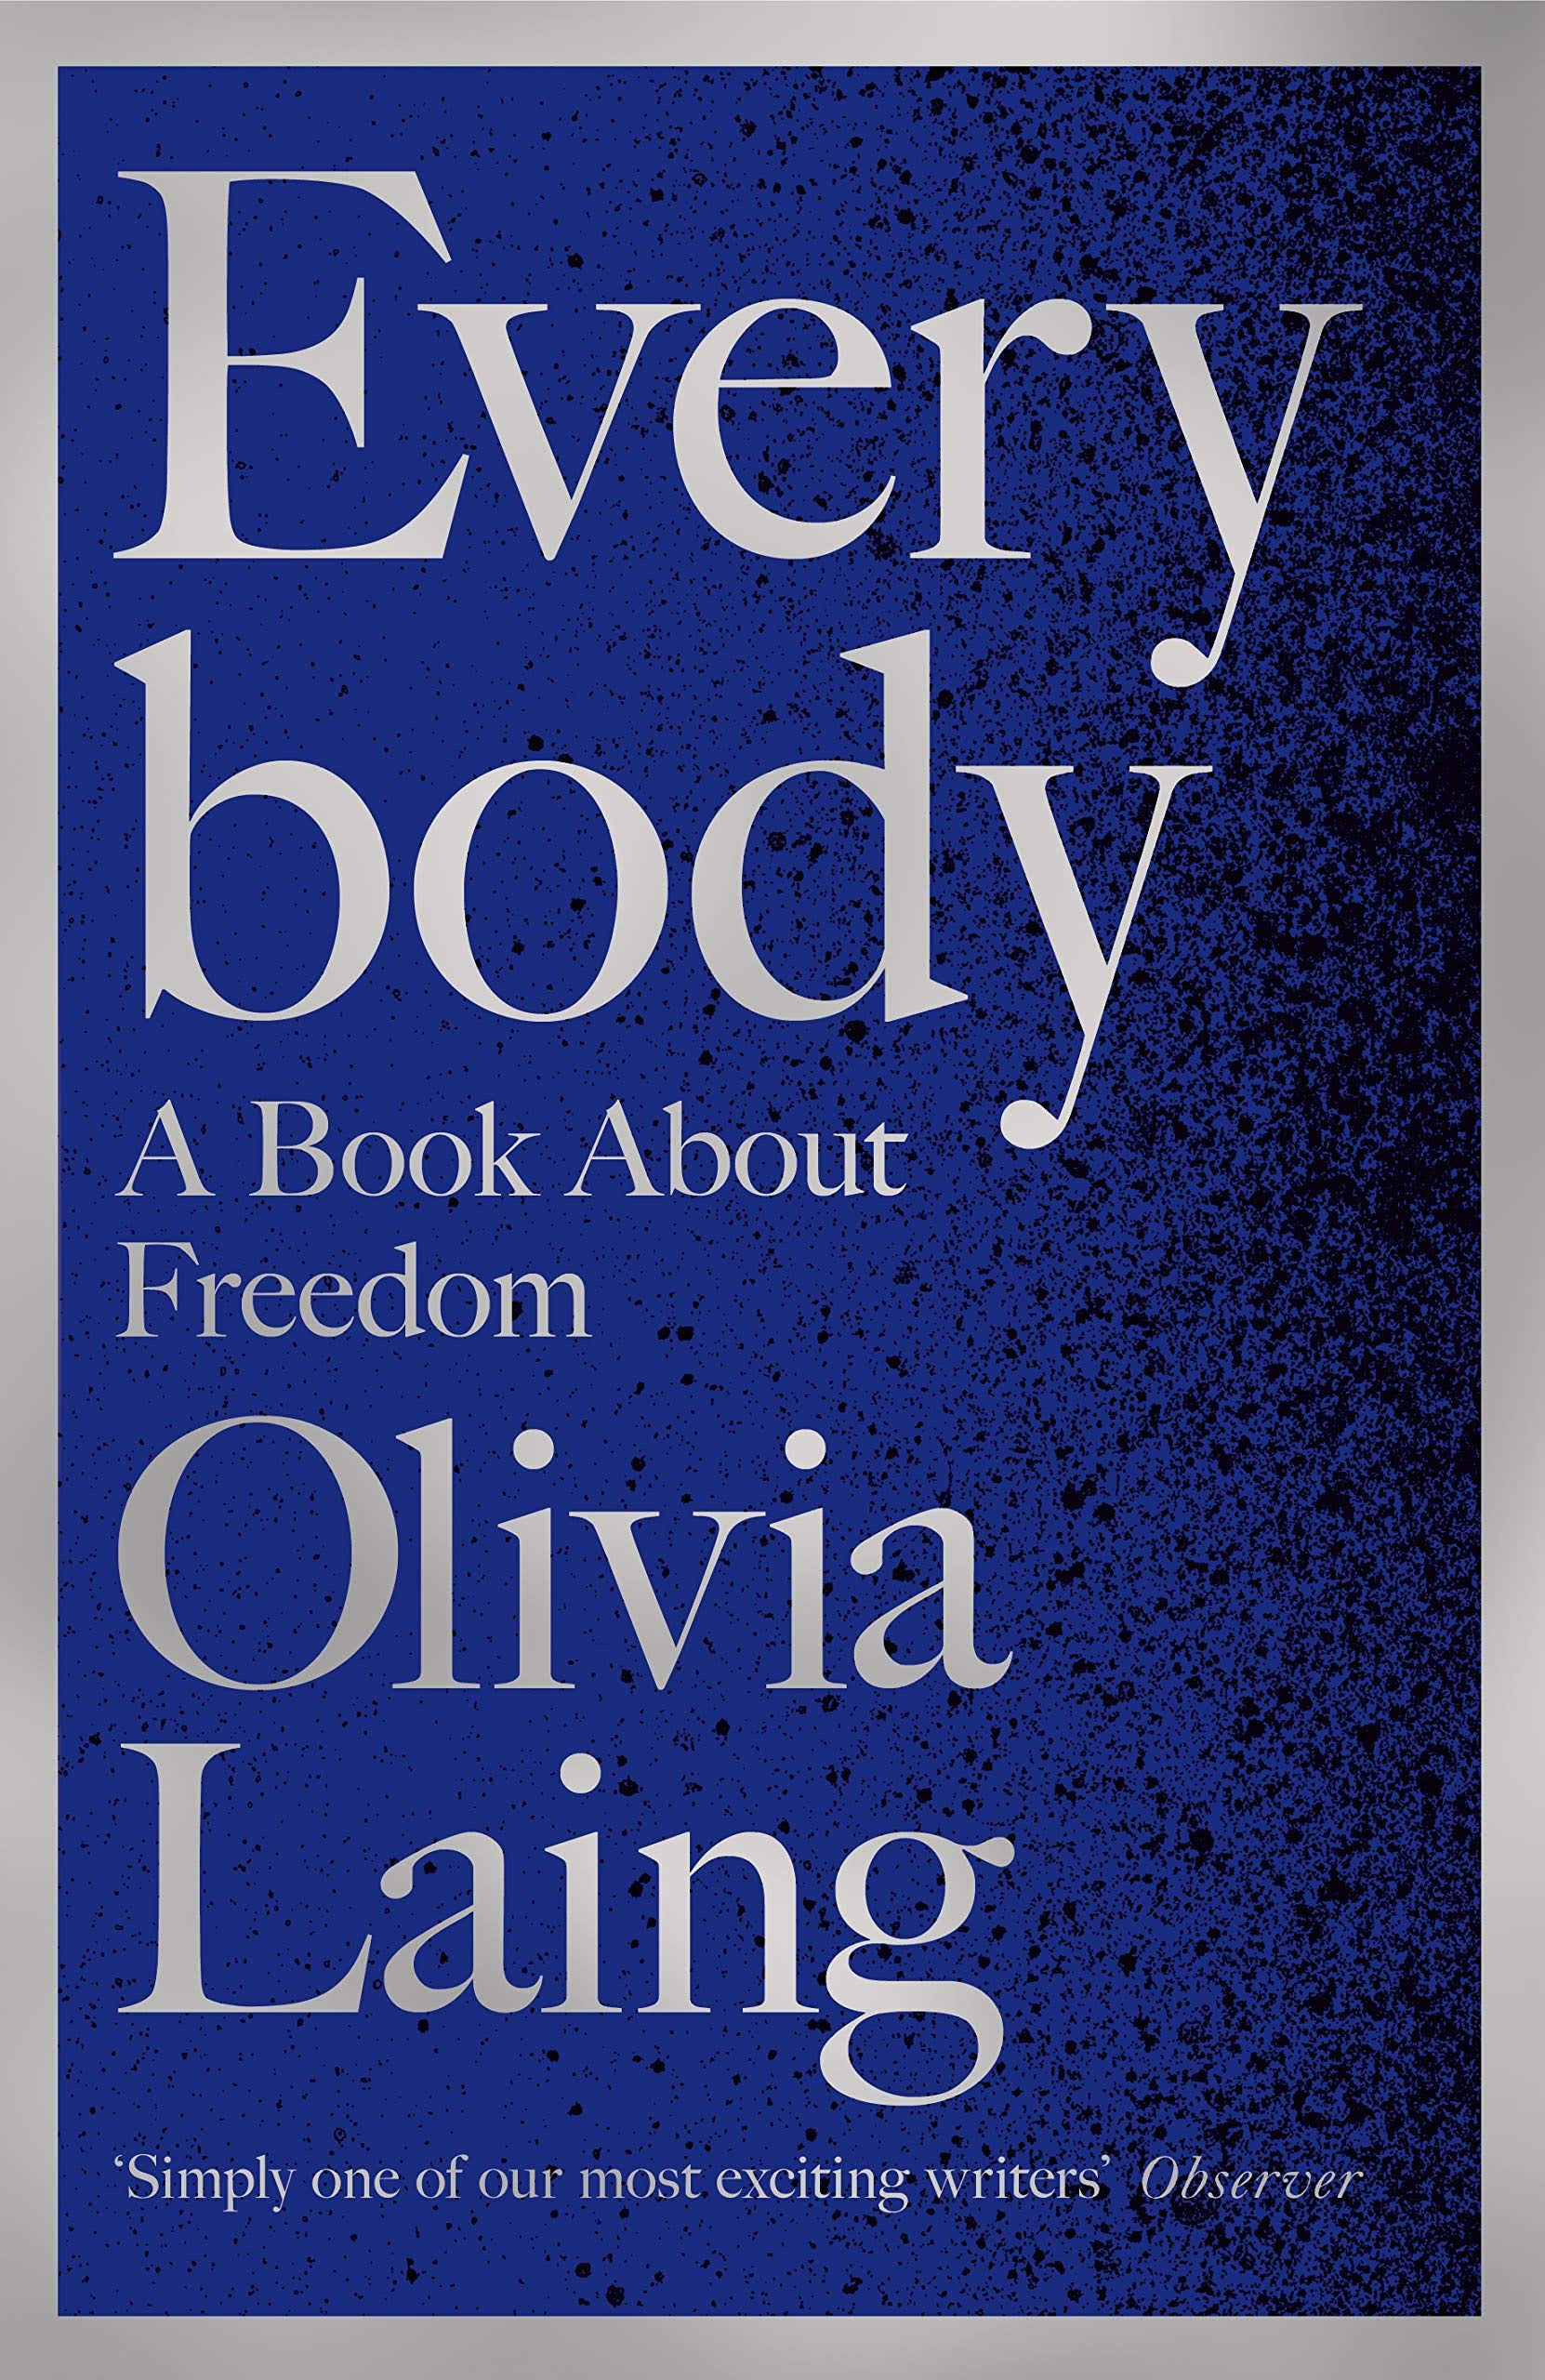 Everybody: A Book About Freedom [Book]